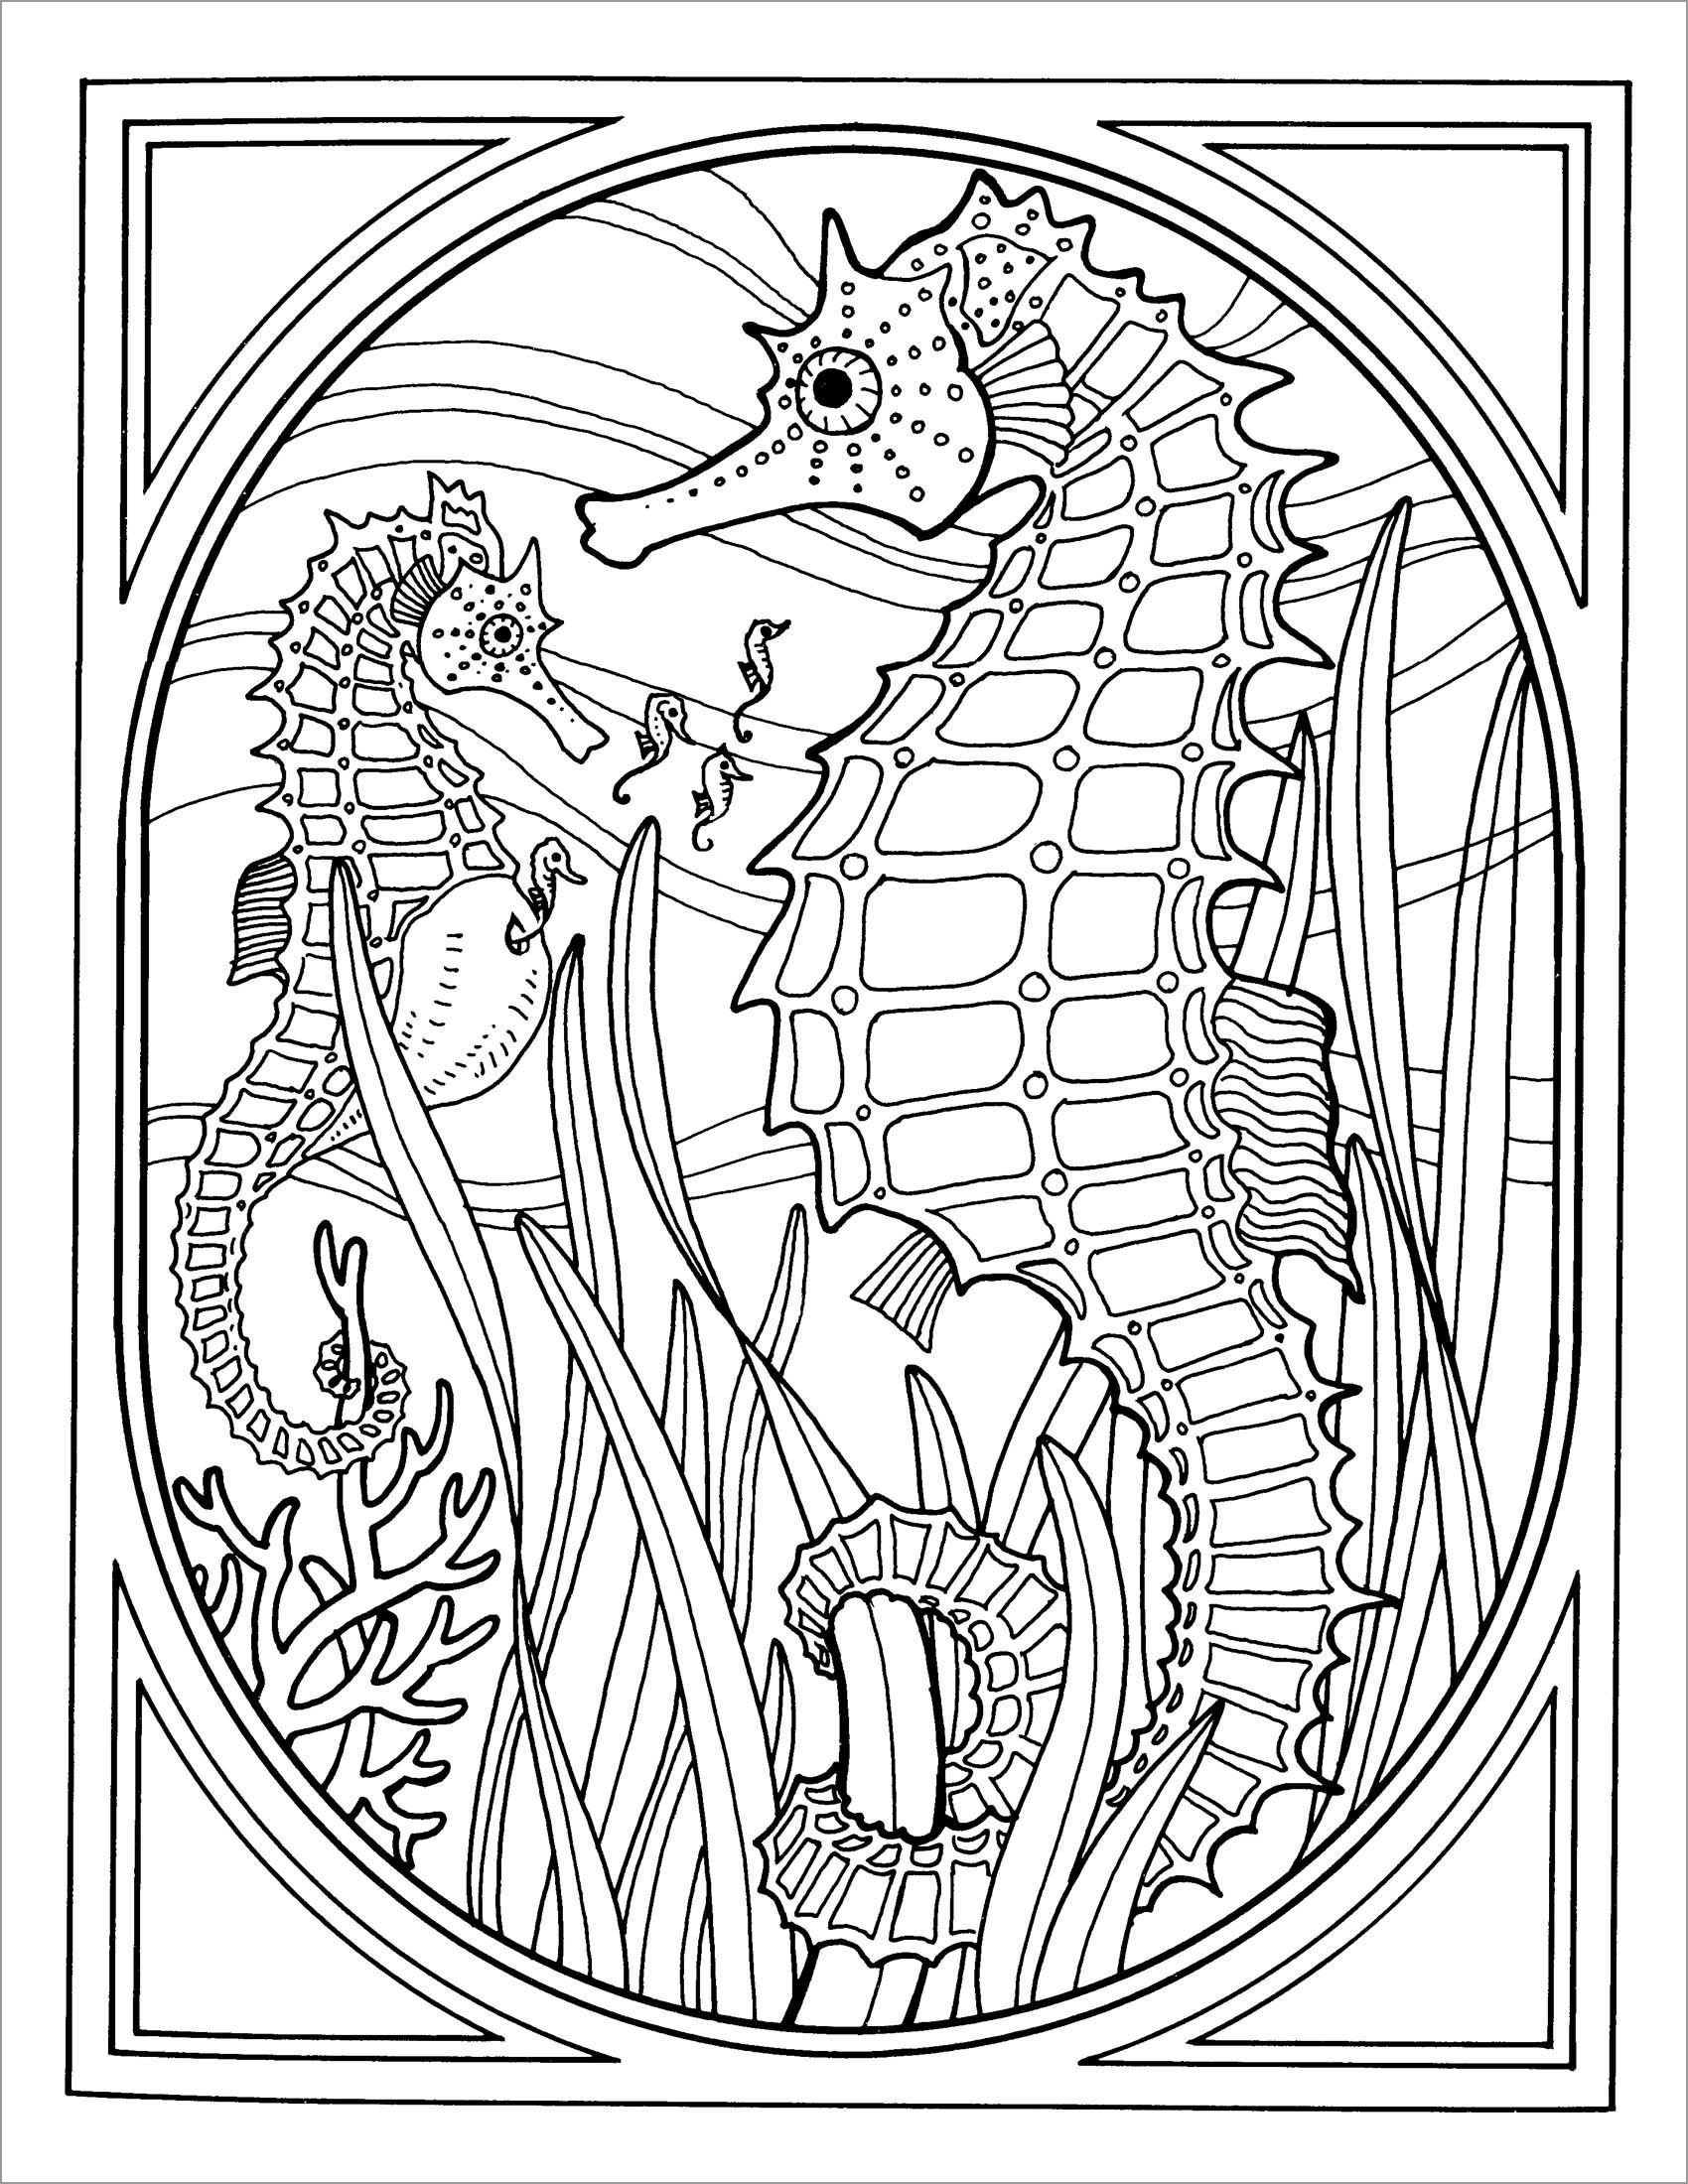 Printable Seahorse Coloring Page for Adult